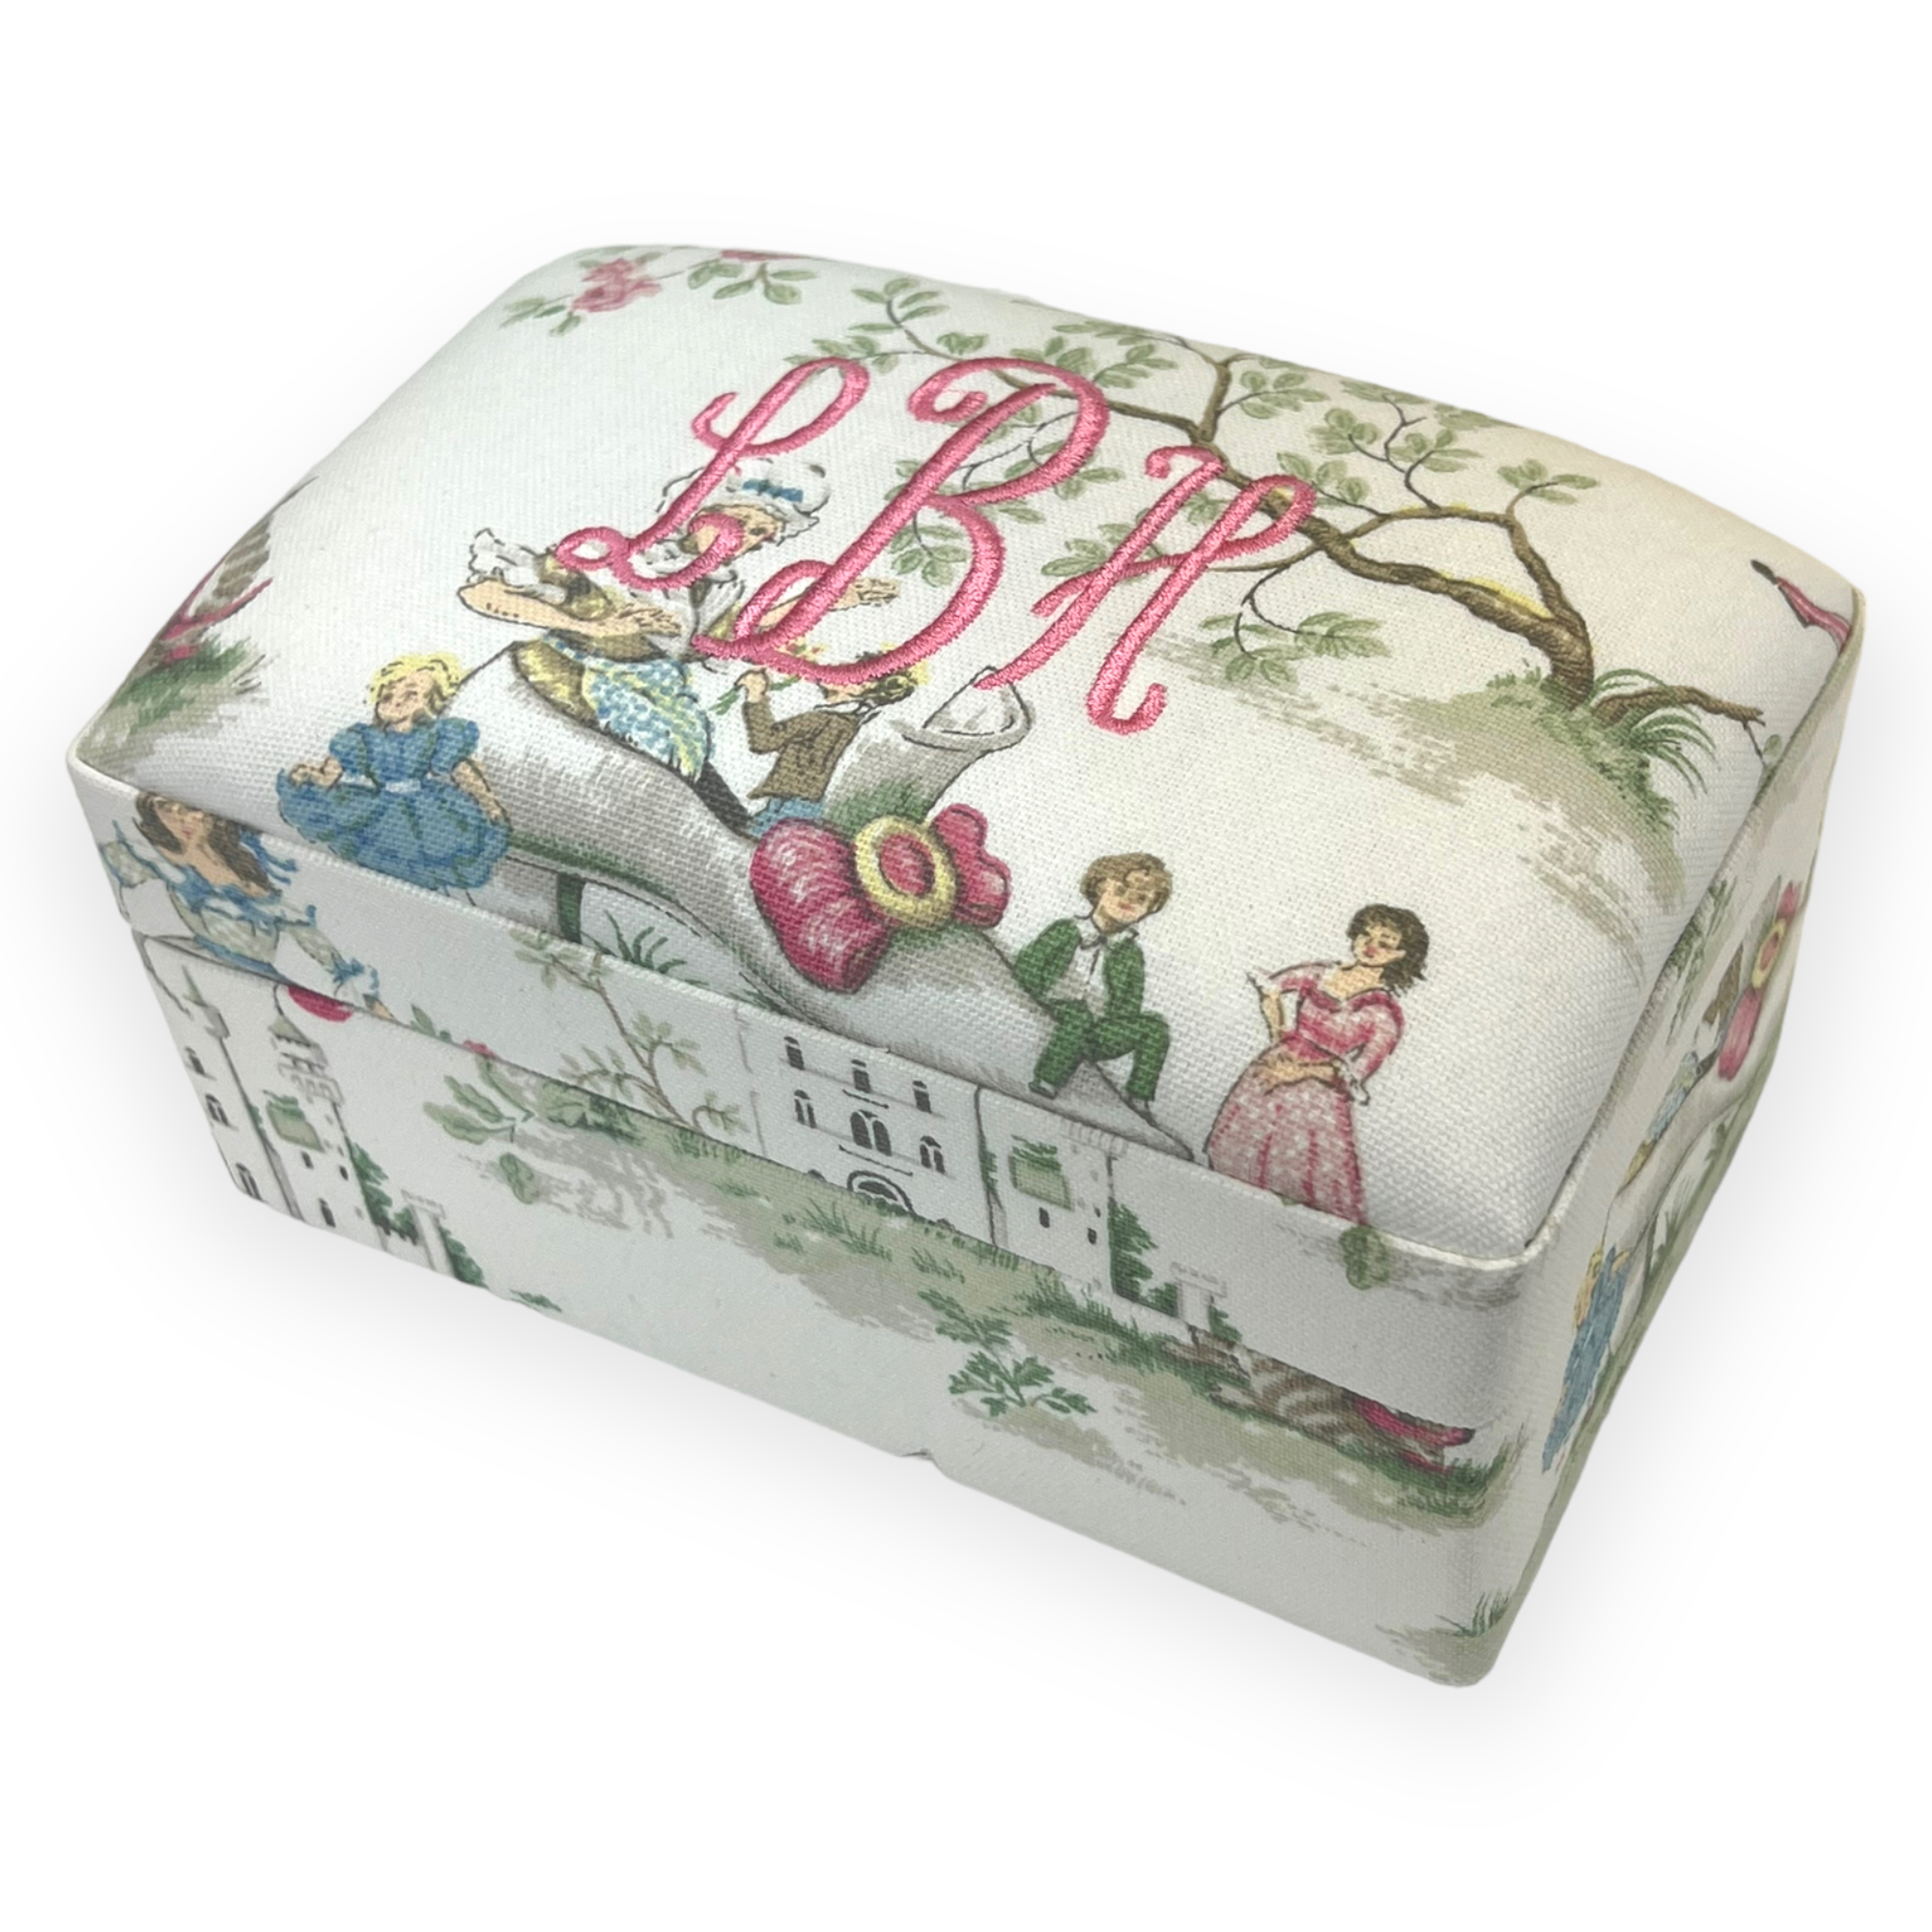 Small Baby Keepsake Box In Cotton In The Baby Garden Collection